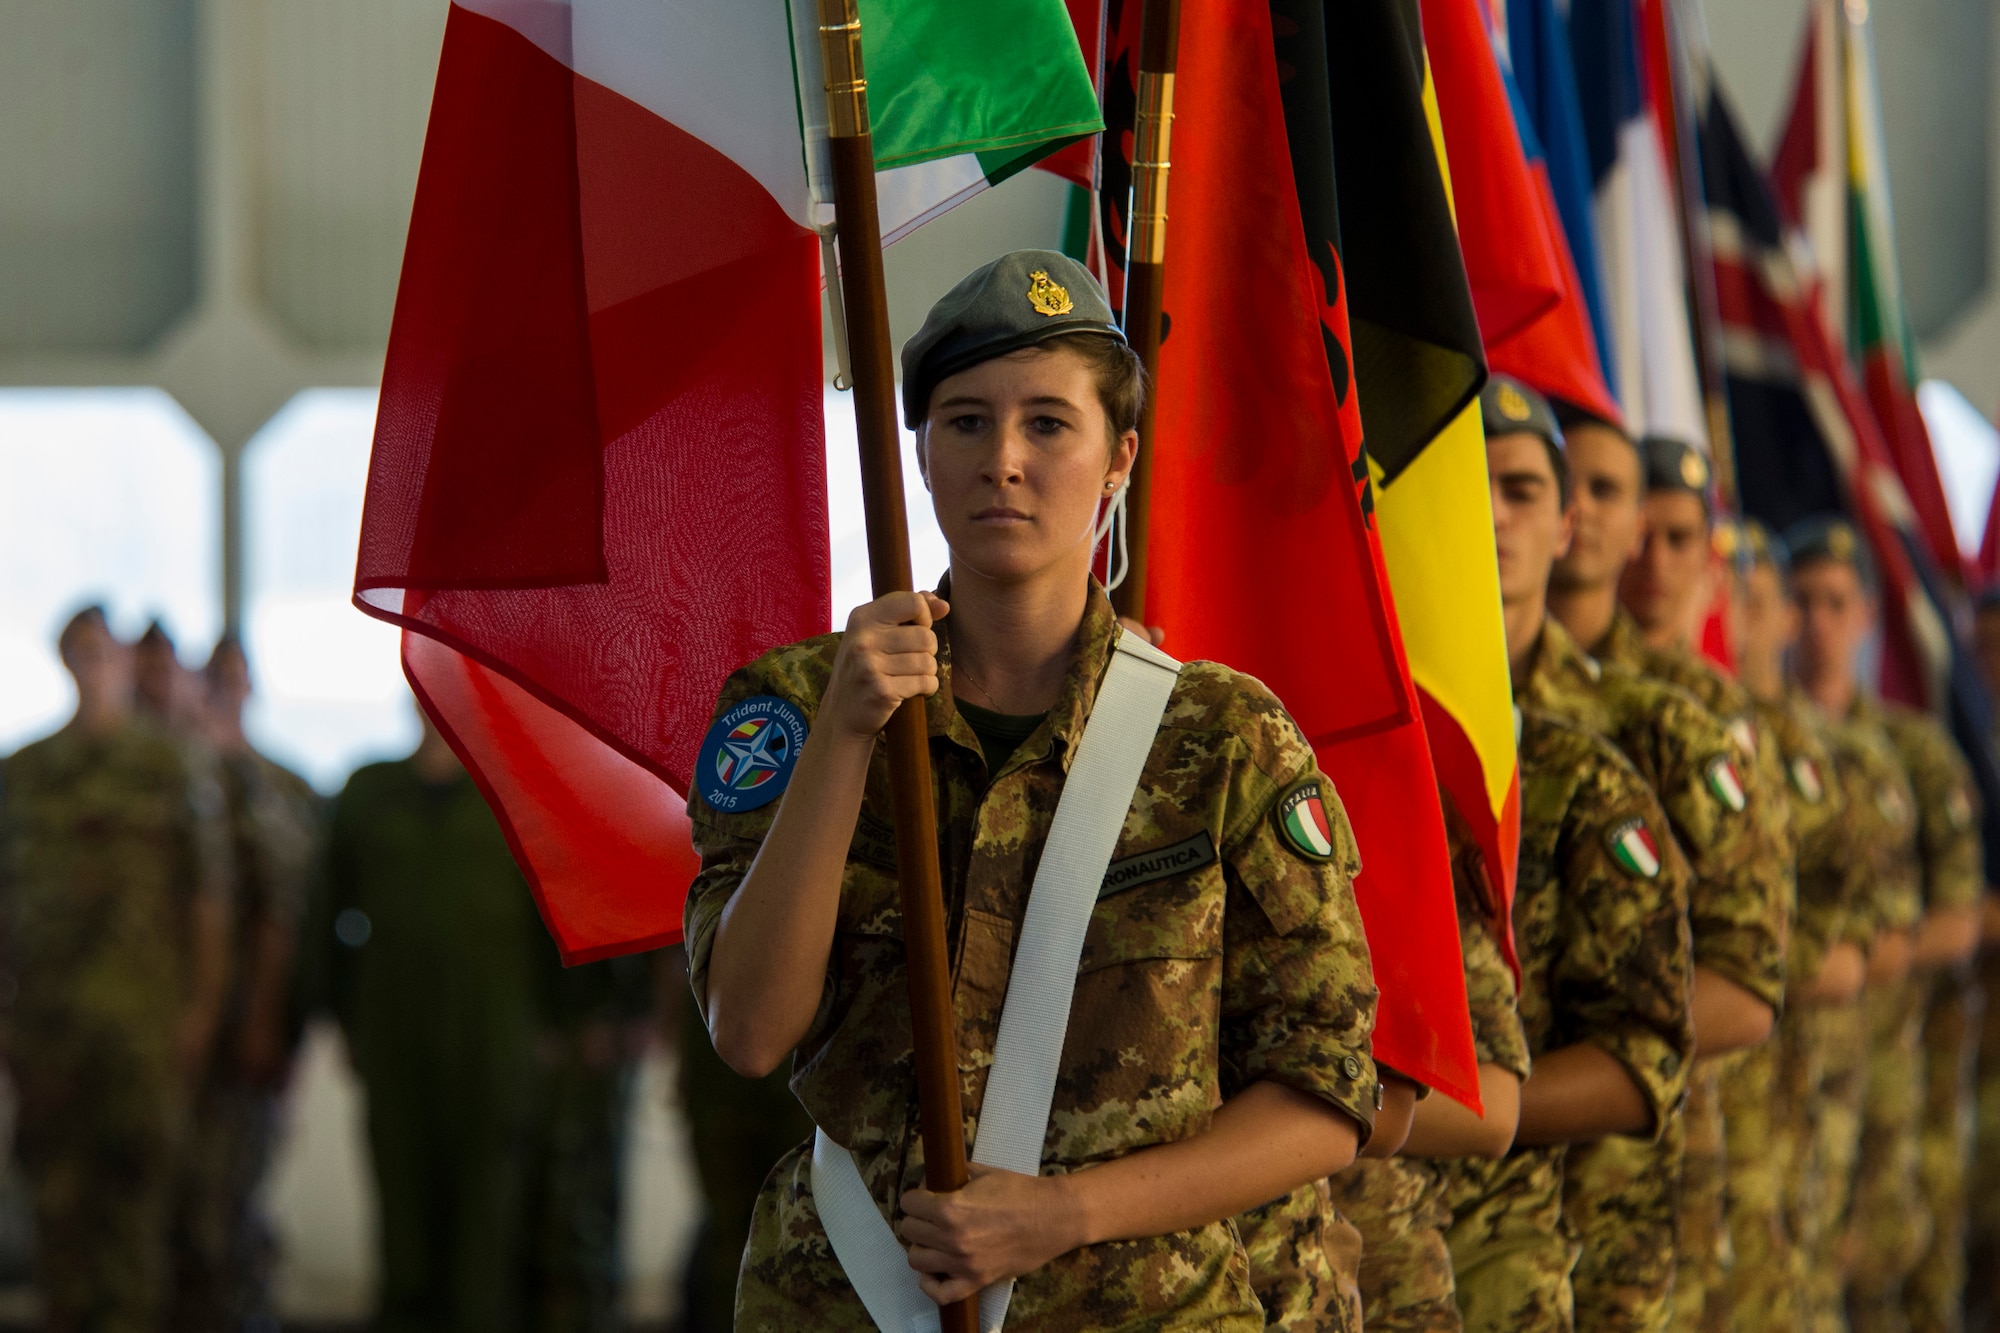 TRAPANI AIR BASE, Italy - Italian air force airmen carry more than 30 Allied and Partner Nations’ flags during a ceremony before the start of the Trapani Air Show at Trapani Air Base, Italy, Oct. 19, 2015. The flags represented each nation participating in Trident Juncture 2015, a training exercise taking place throughout Italy, Portugal, Spain, the Atlantic Ocean, the Mediterranean Sea, Canada, Norway, Germany, Belgium and the Netherlands. (U.S. Air Force photo by Airman 1st Class Luke Kitterman/Released)